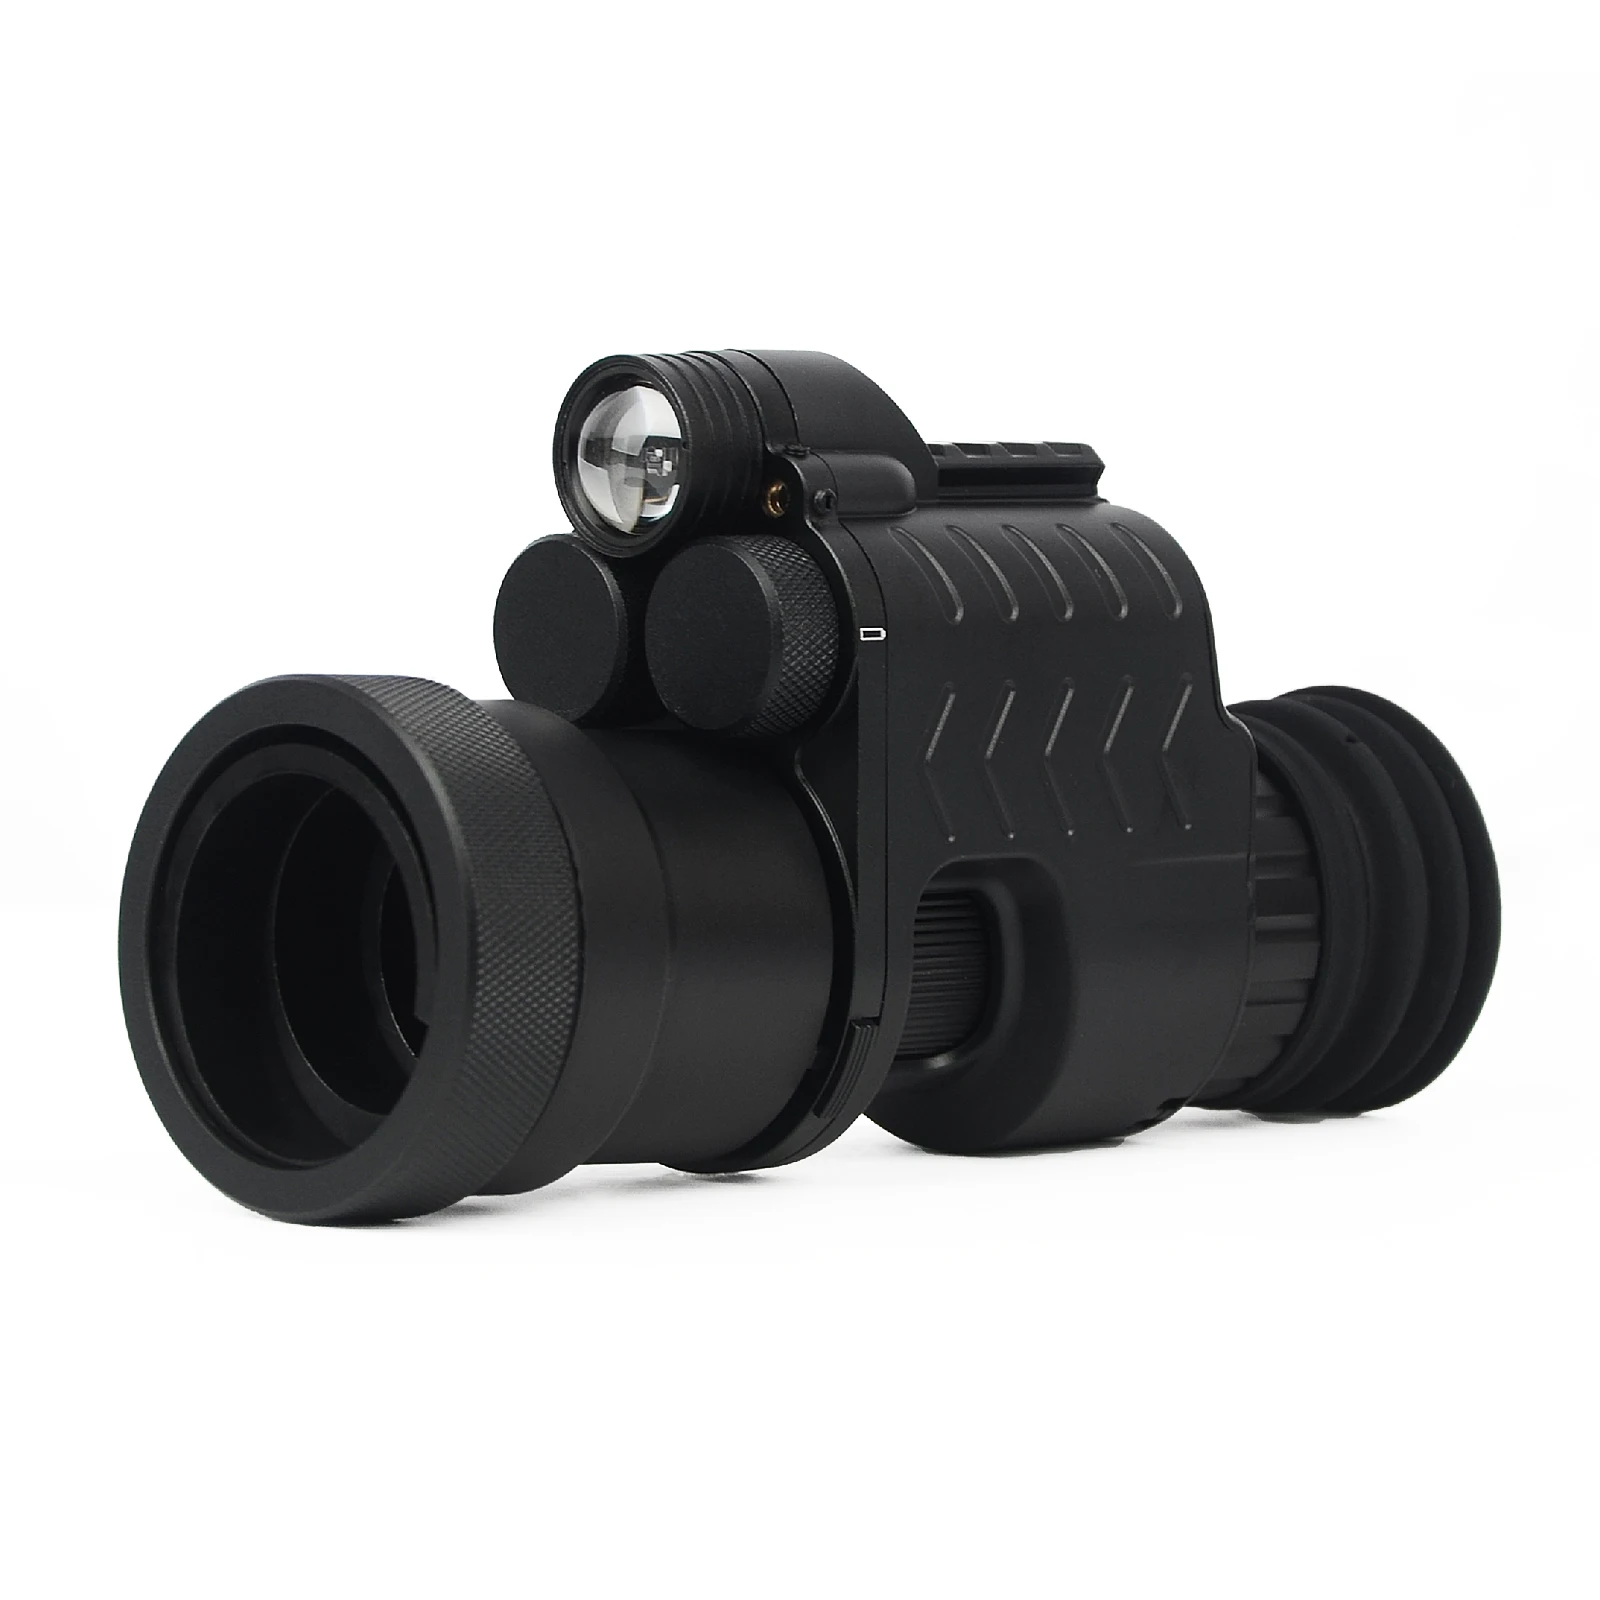 MARCH NV310 Infrared Device Outdoors Hunting Night vision scope set HD Wifi Camera Night Vision Monocular